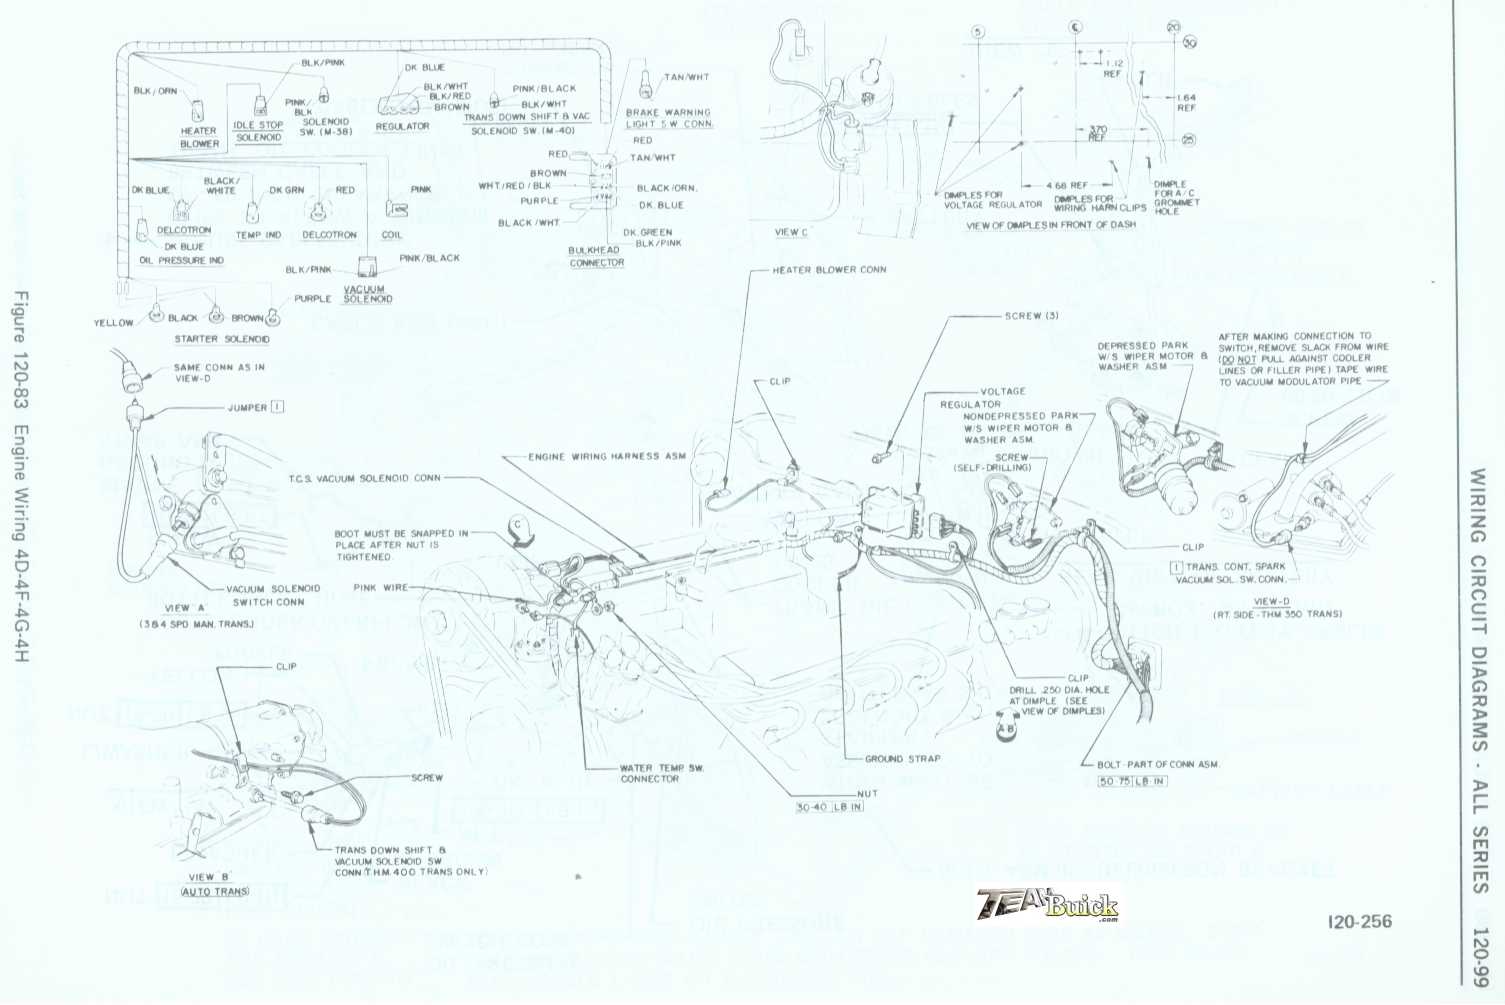 1966 Buick Wildcat And Electra Wiring Diagram